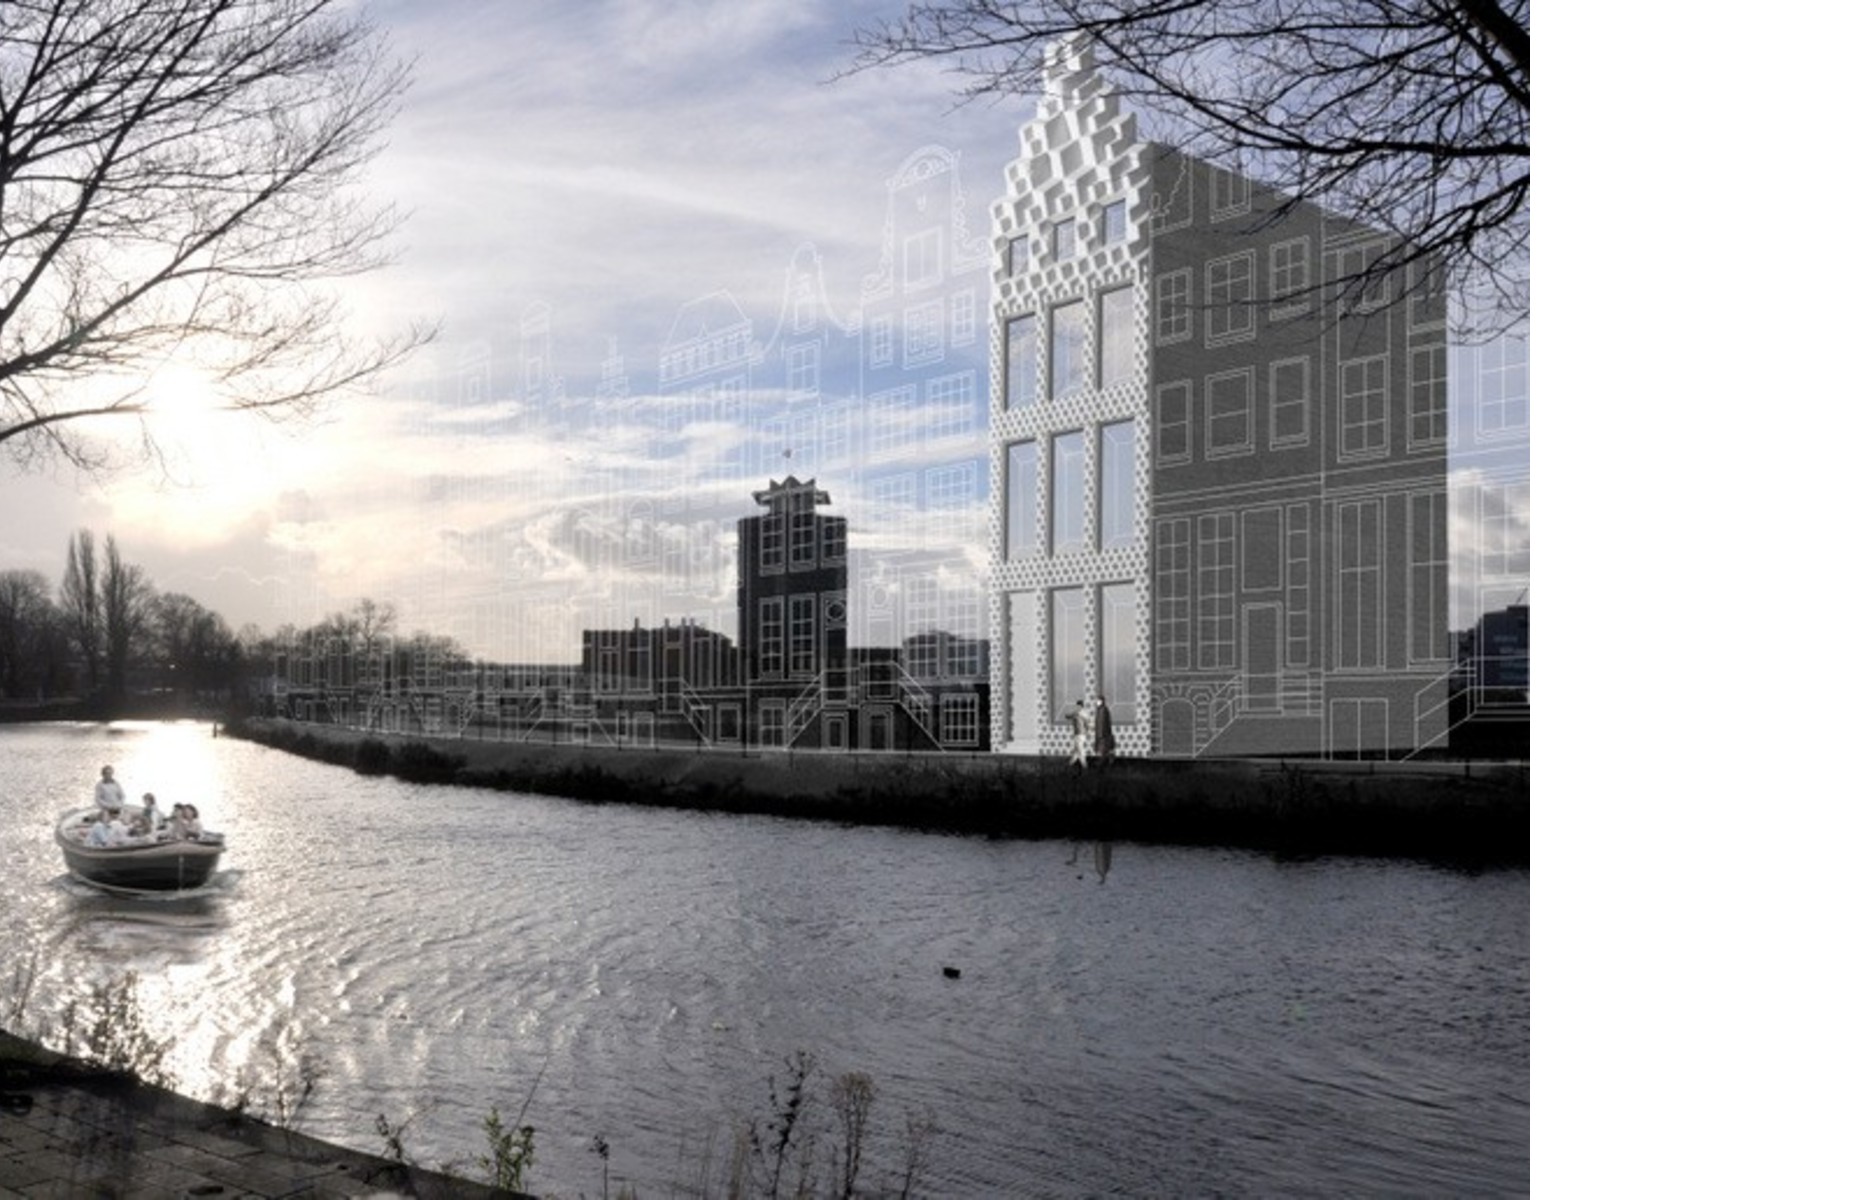 Amsterdam architects plan 3D-printed canal house